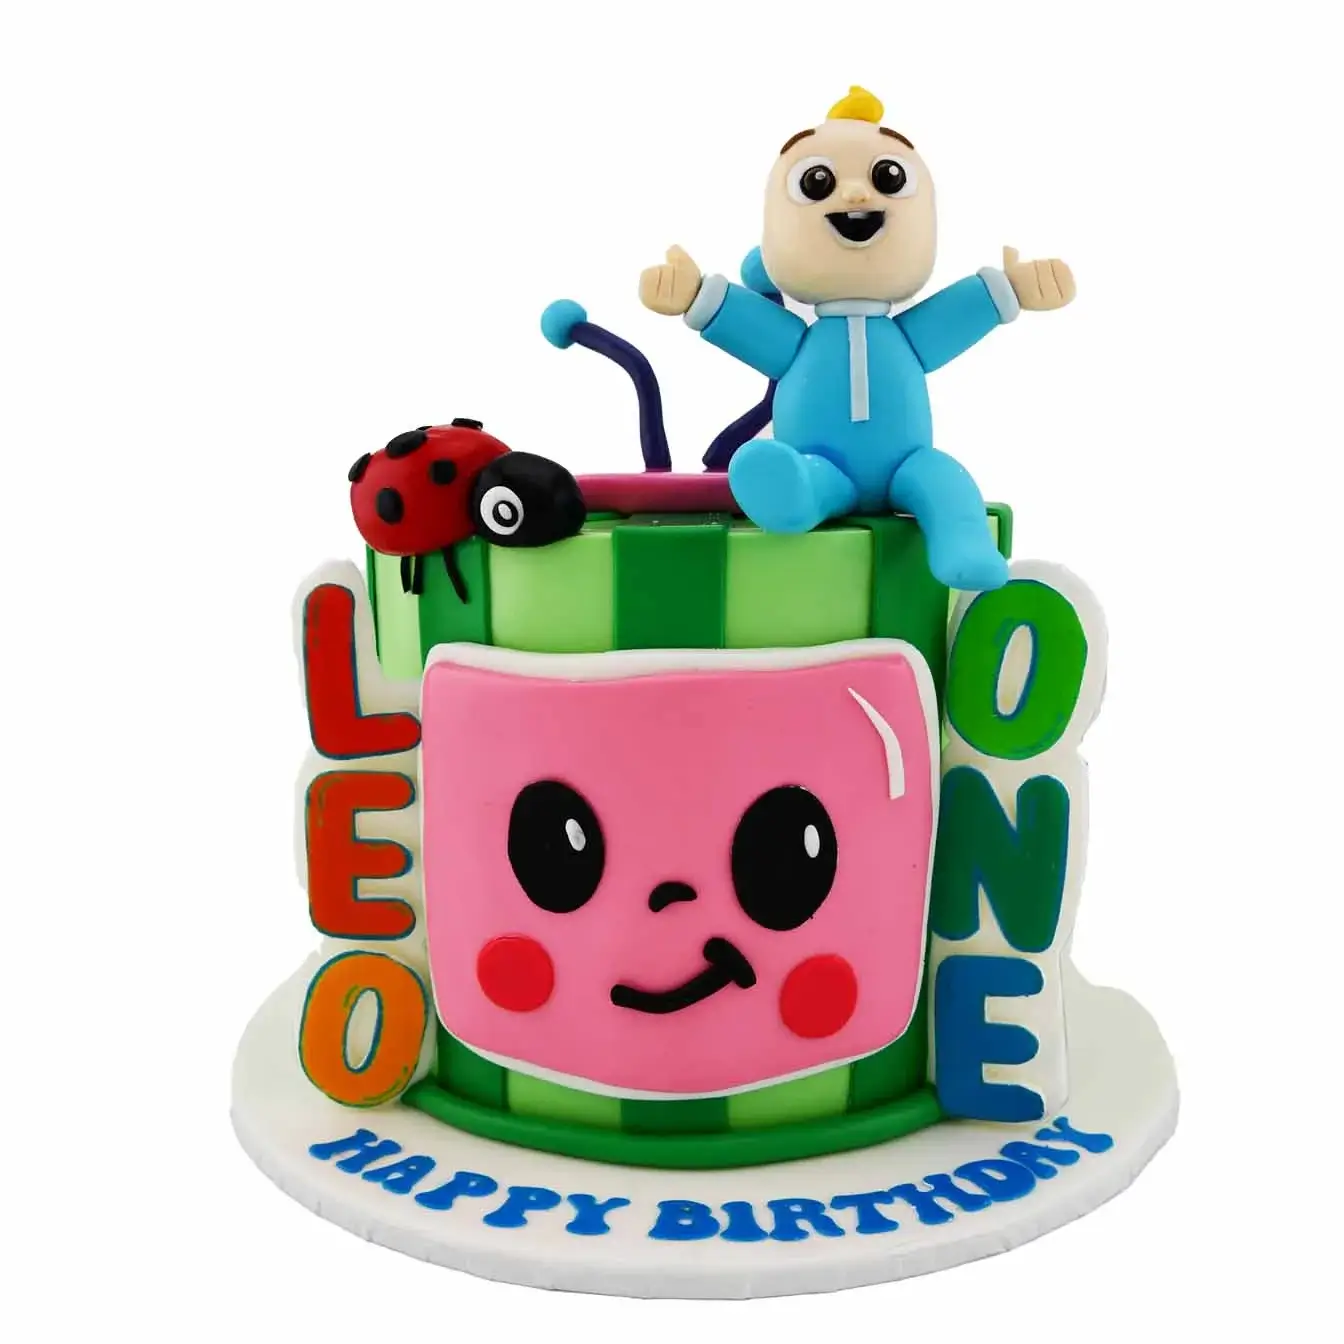 Coco Melon Cake with vibrant colors and adorable characters, perfect for a Coco Melon-themed party or celebration